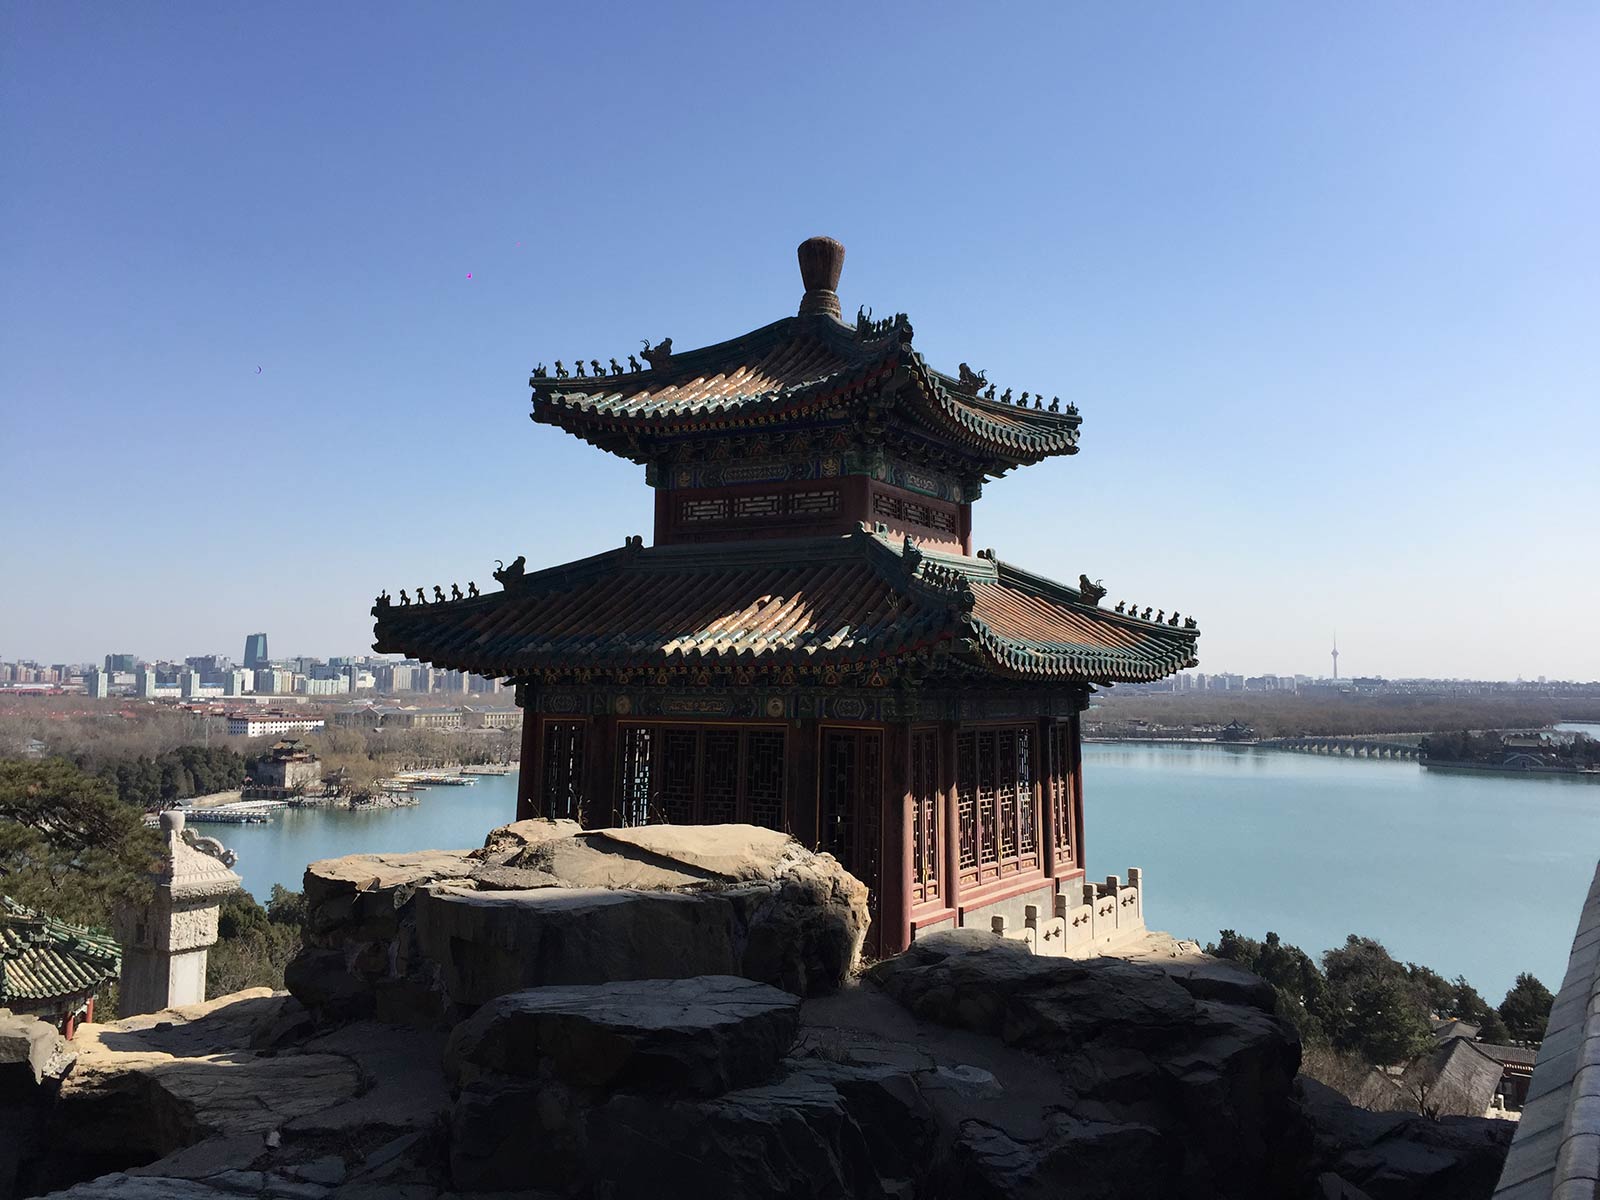 A tower at the Summer Palace in Beijing, China. The Summer Palace